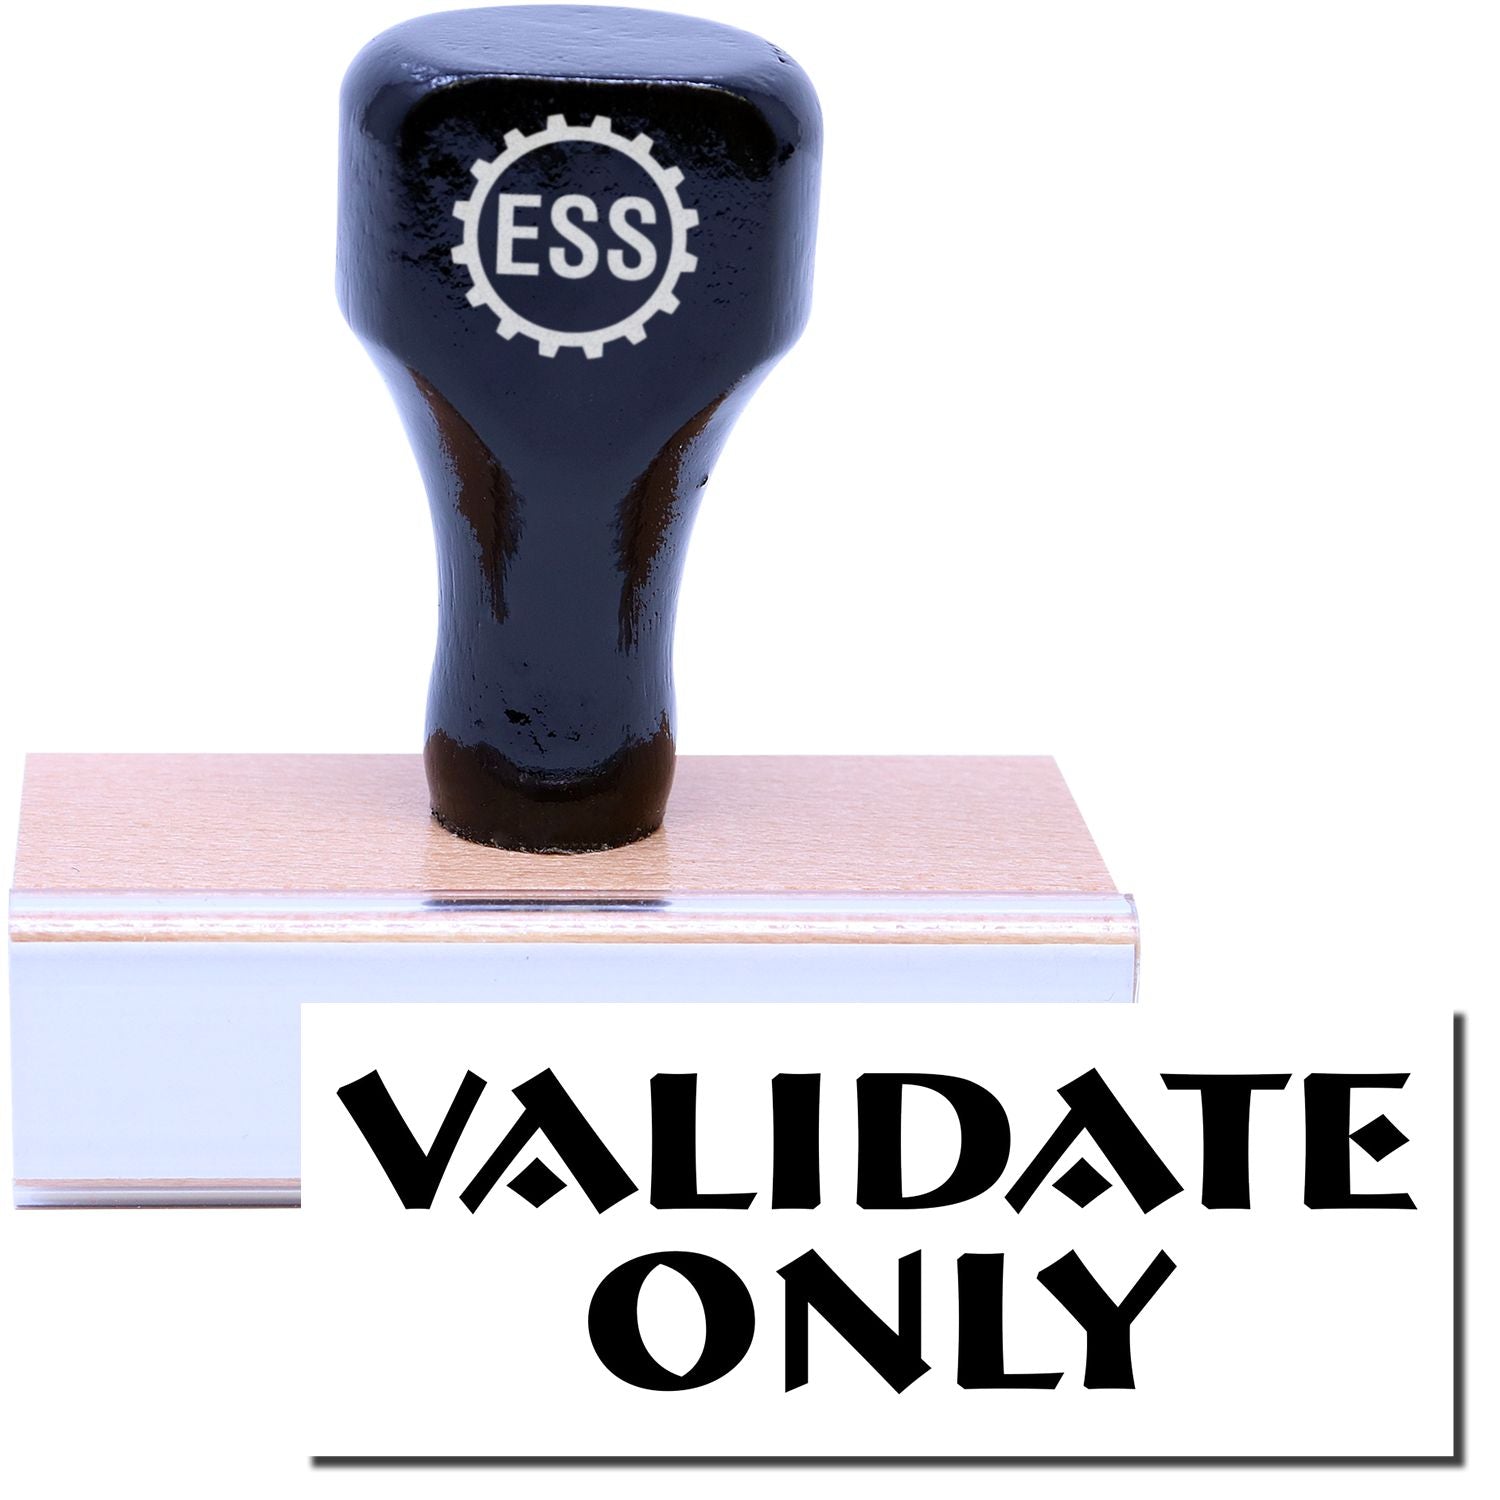 A stock office rubber stamp with a stamped image showing how the text "VALIDATE ONLY" in a large font is displayed after stamping.